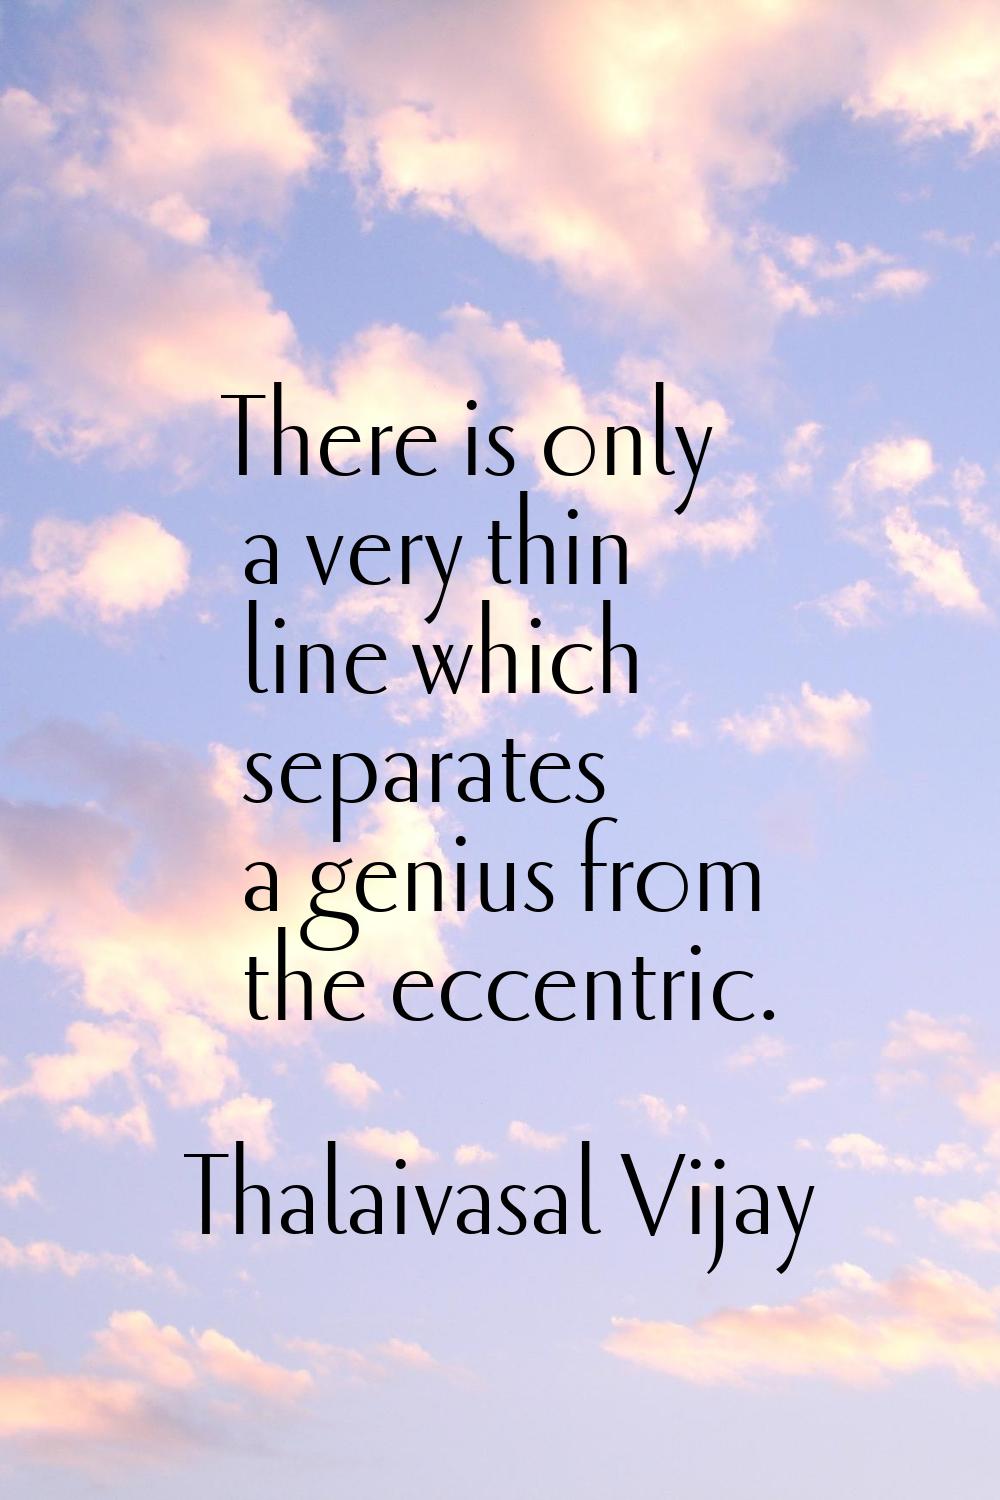 There is only a very thin line which separates a genius from the eccentric.